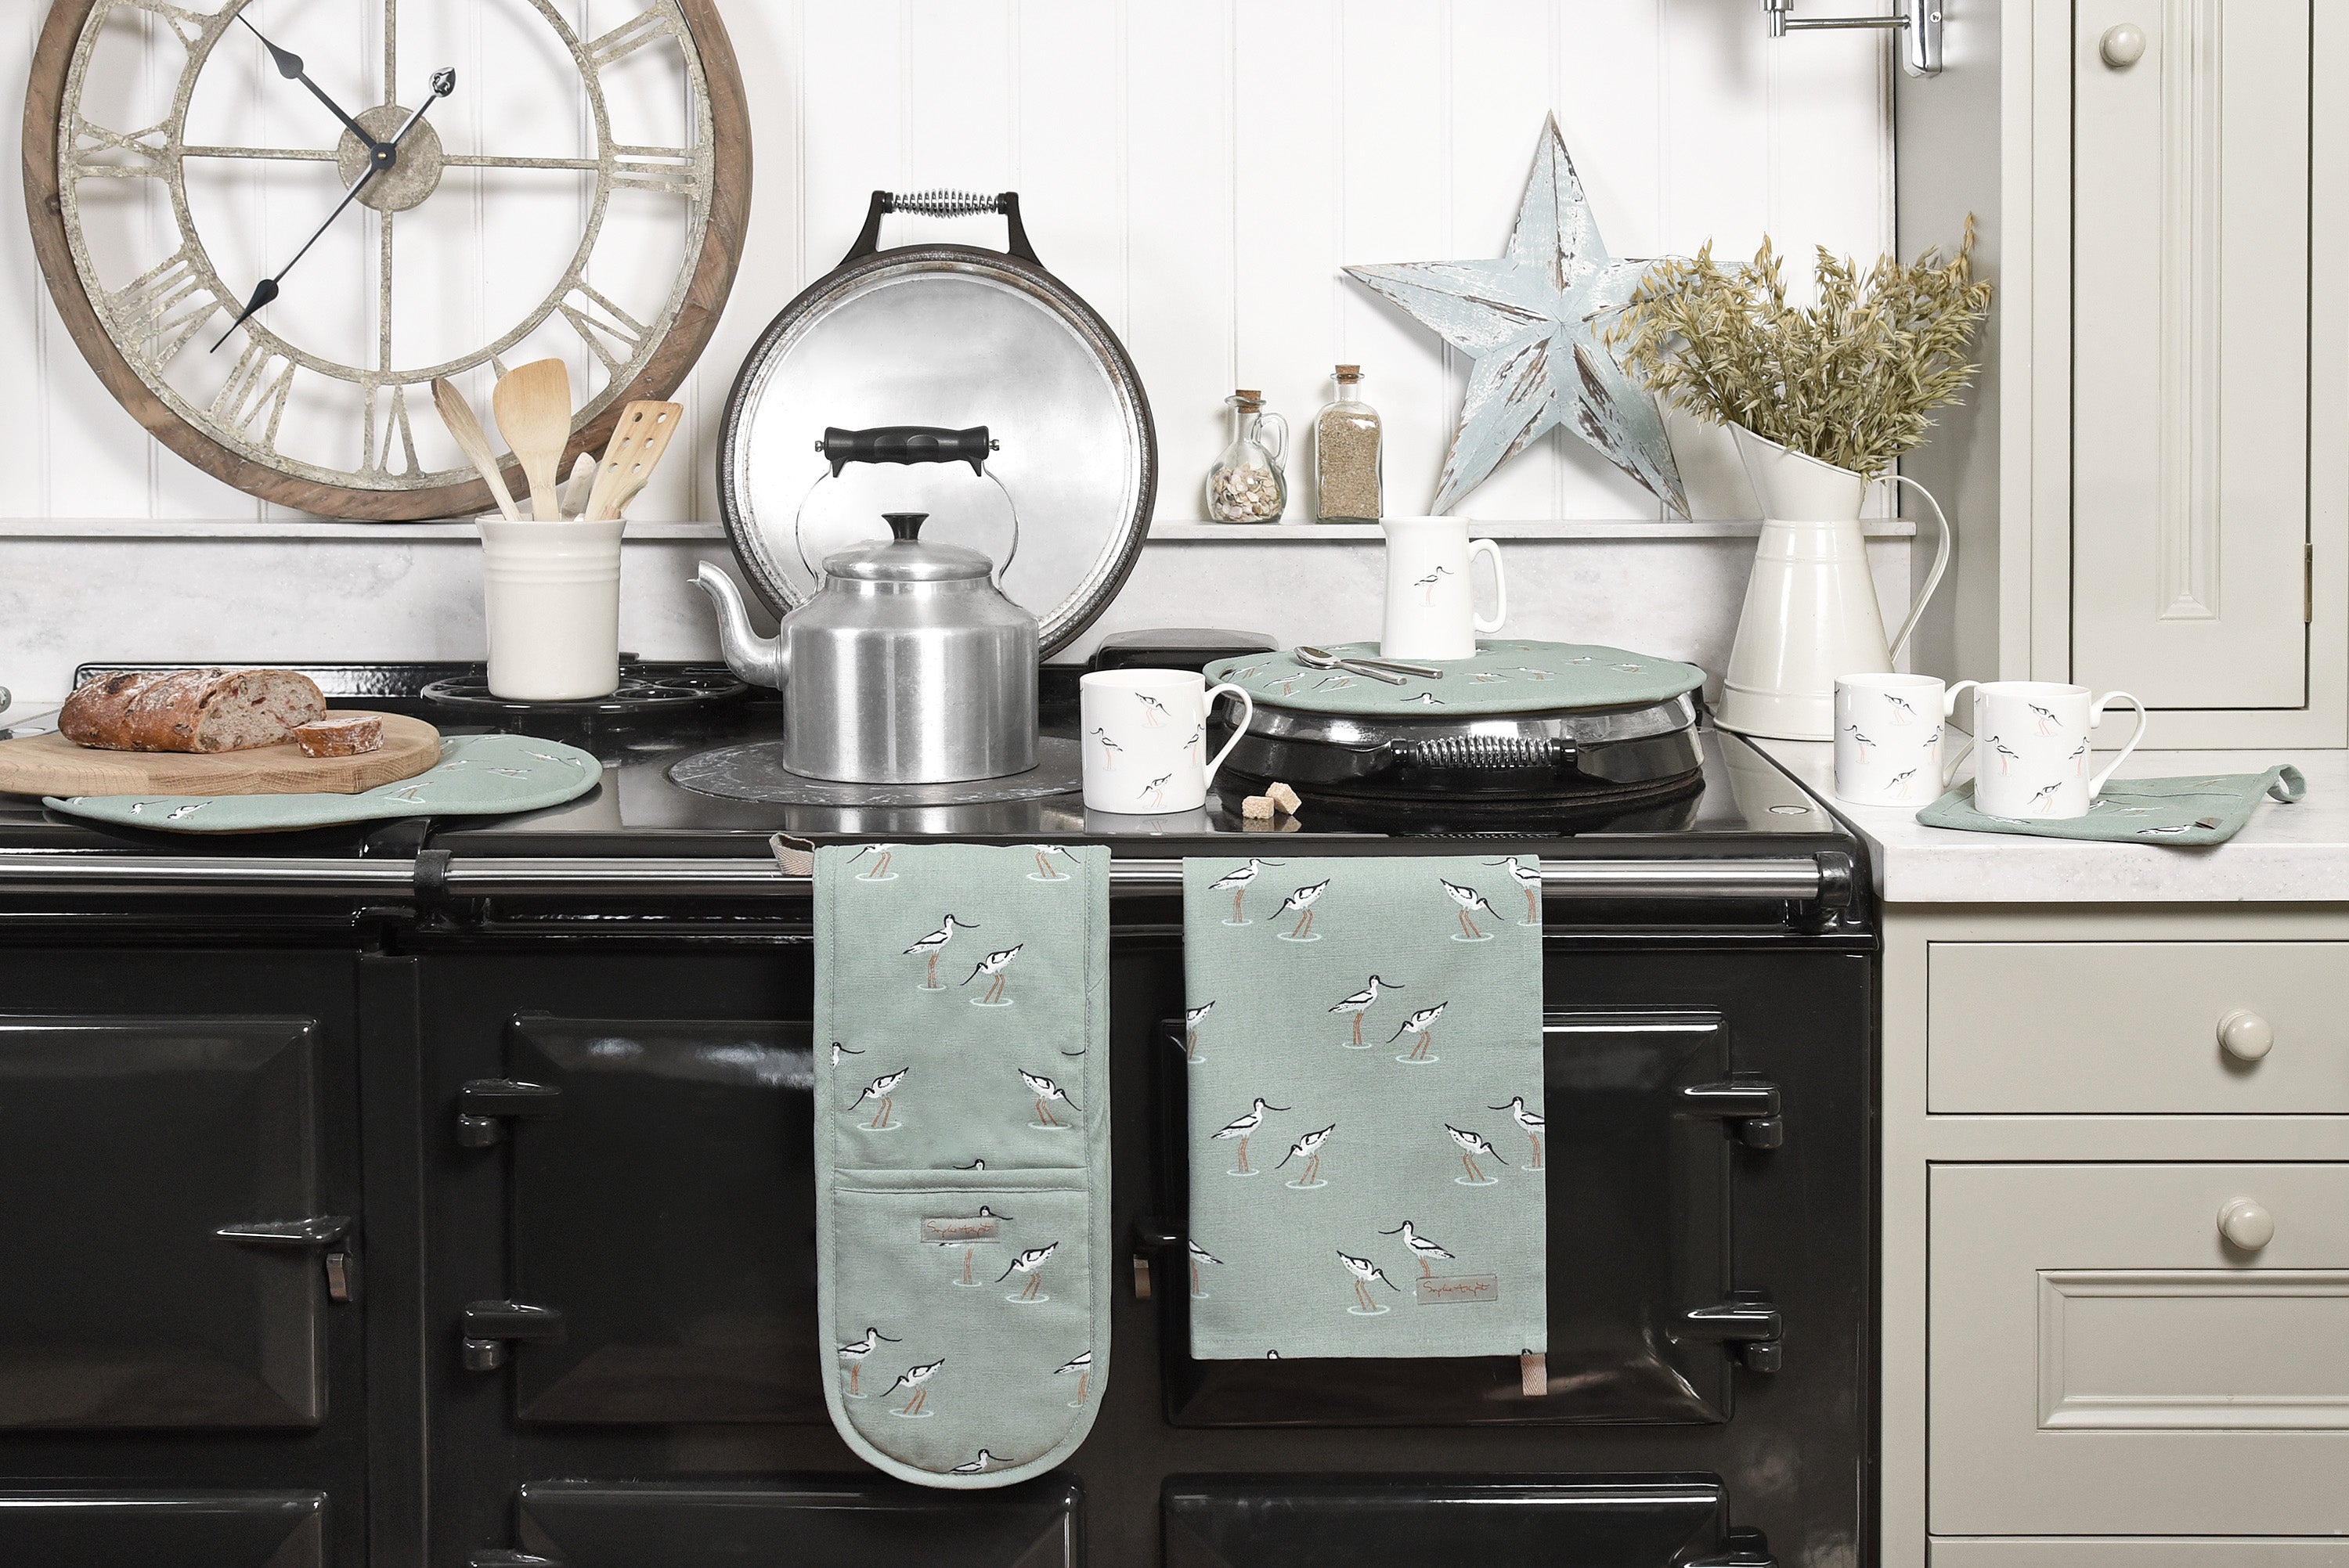 Sophie Allport's AGA is dressed in her new coastal design, with tea towel, oven gloves, hob cover and more.